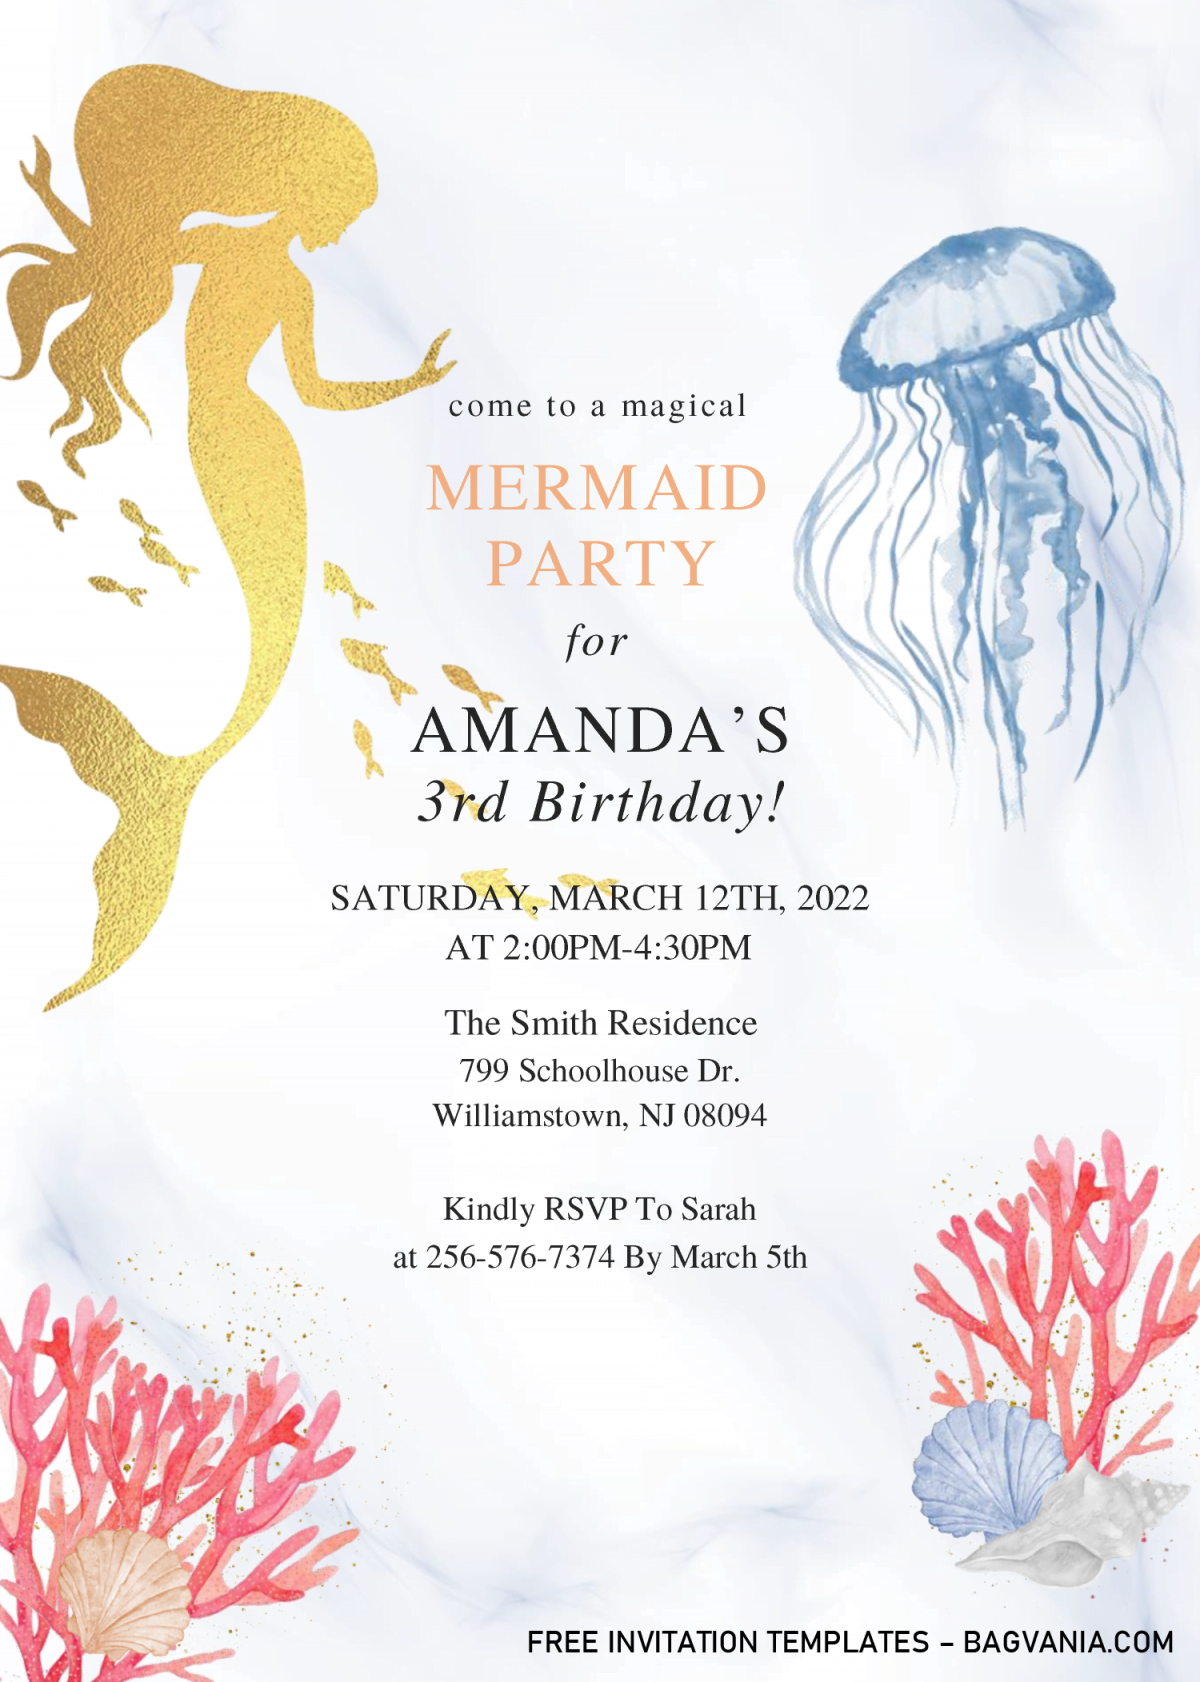 Mermaid Party Invitation Templates - Editable With Microsoft Word and has portrait orientation